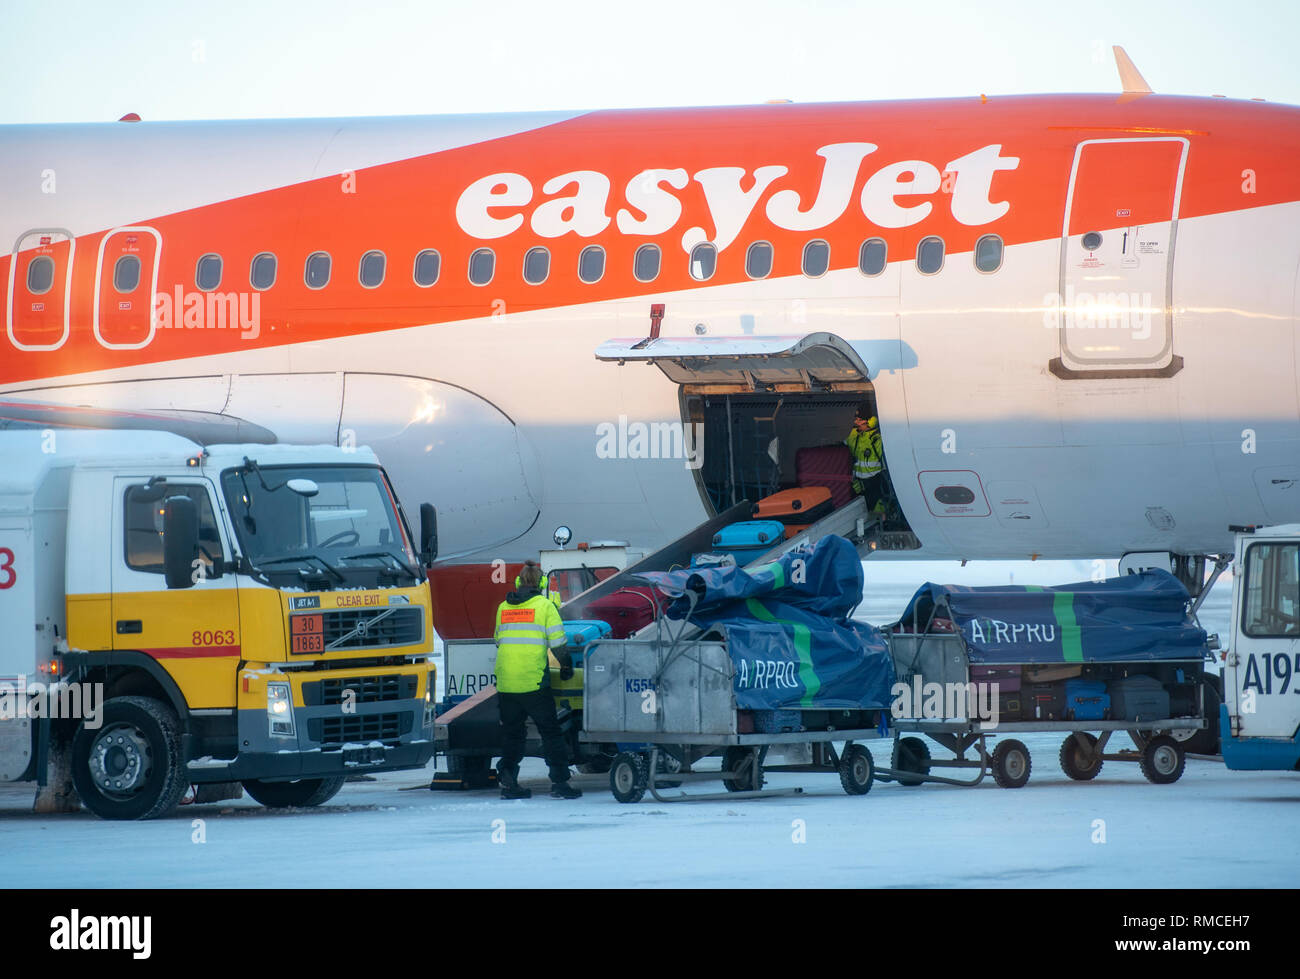 Airport workers removing the luggage bags from an easyJet aeroplane, Kittila airport sign, Kitilla, Finland. Stock Photo